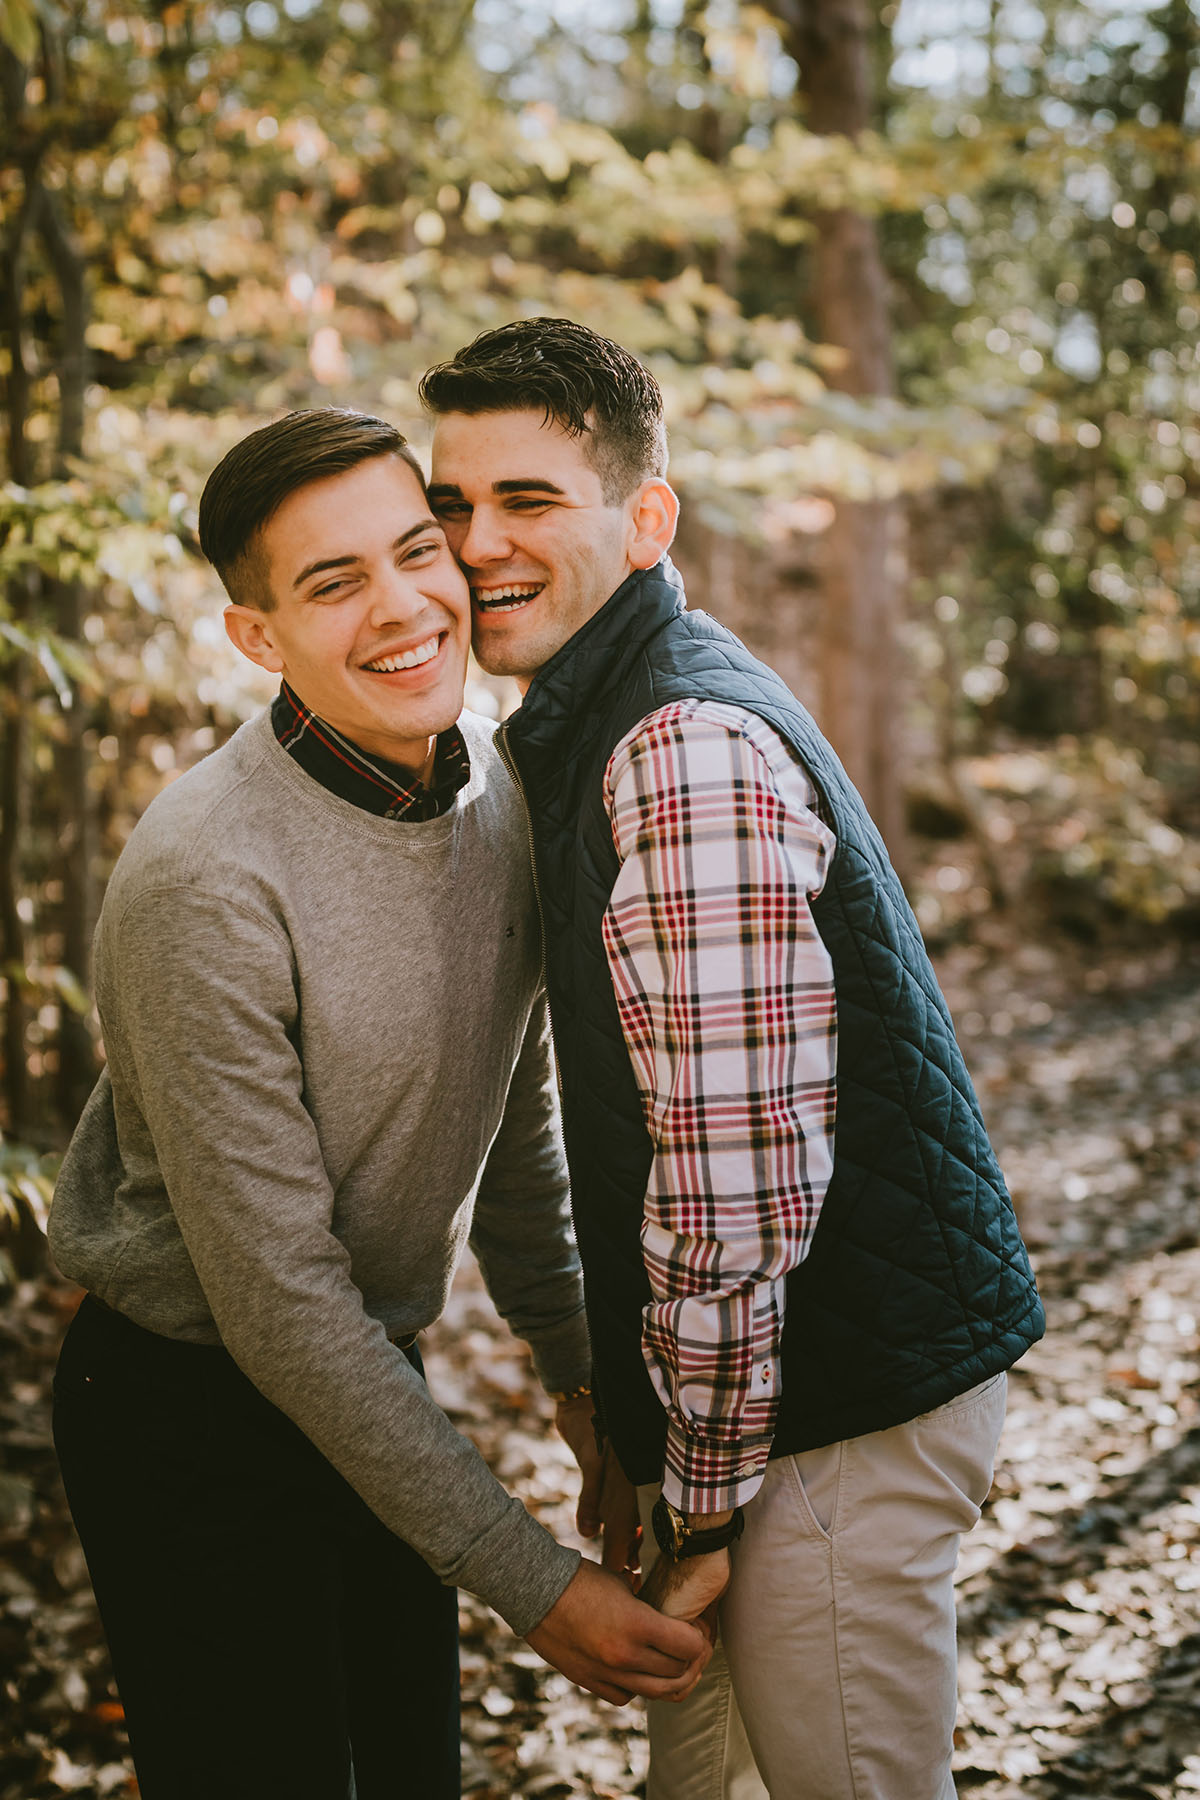 Autumn surprise proposal at Government Island two grooms gay engagement fall foliage Stafford, Virginia flannel shirt jeans woods